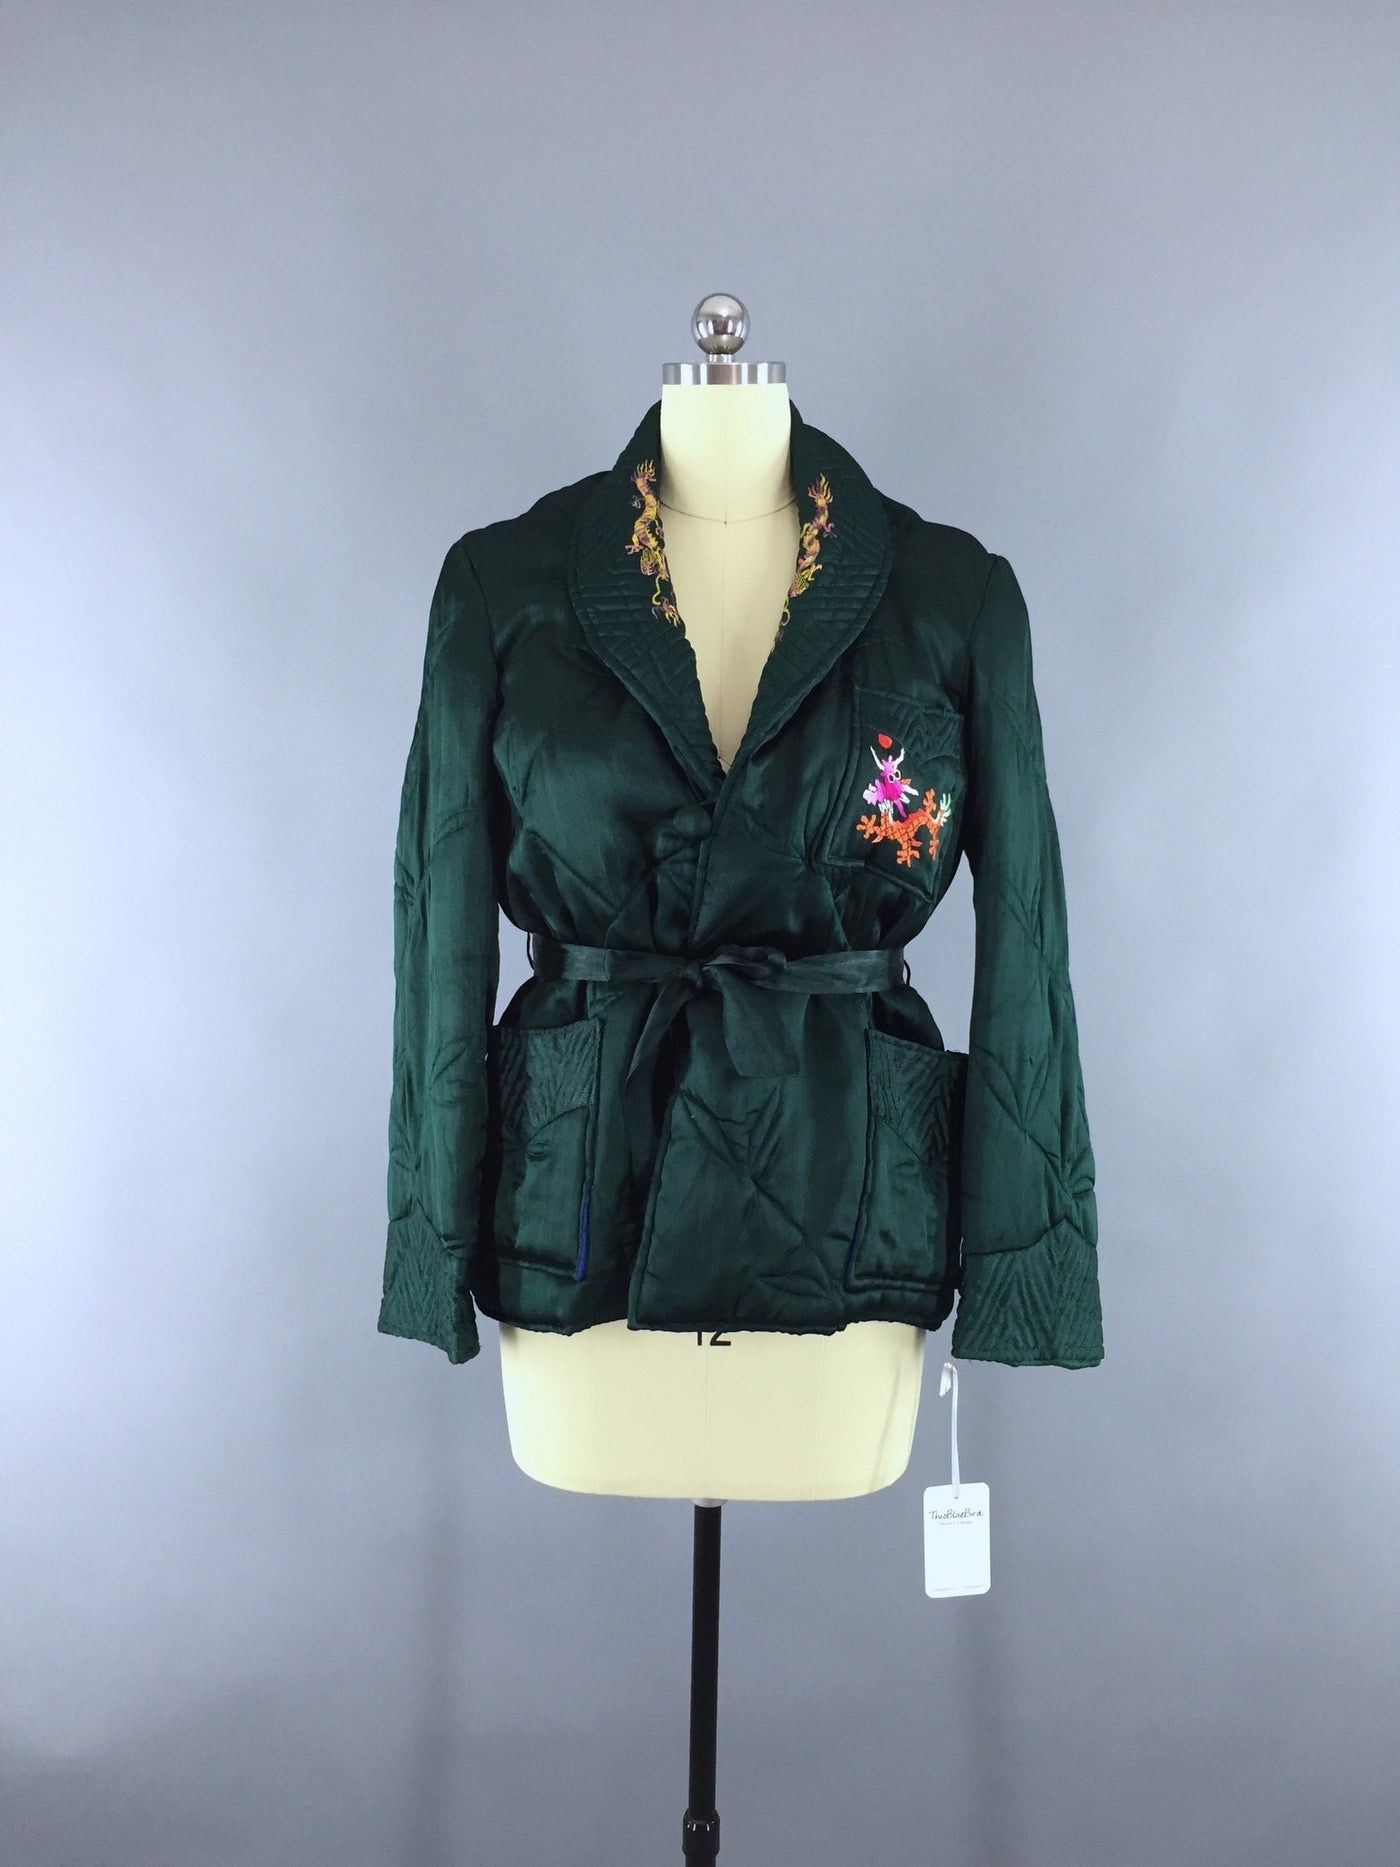 Vintage 1930s-1940s Satin Bed Jacket / Embroidered Dragons - ThisBlueBird